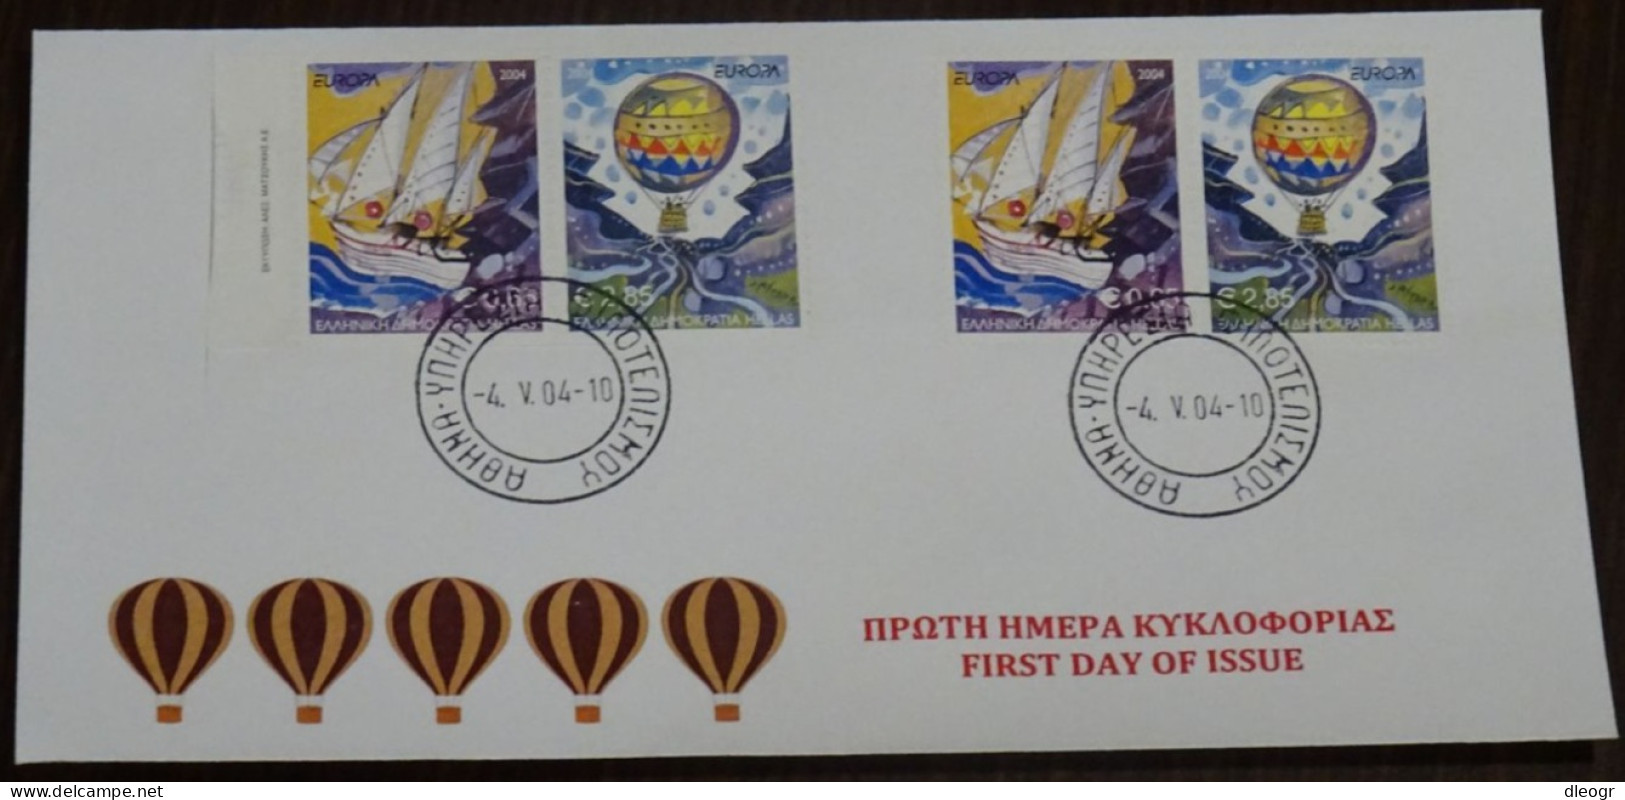 Greece 2004 Europa Imperforate+Perf Unofficial FDC - FDC